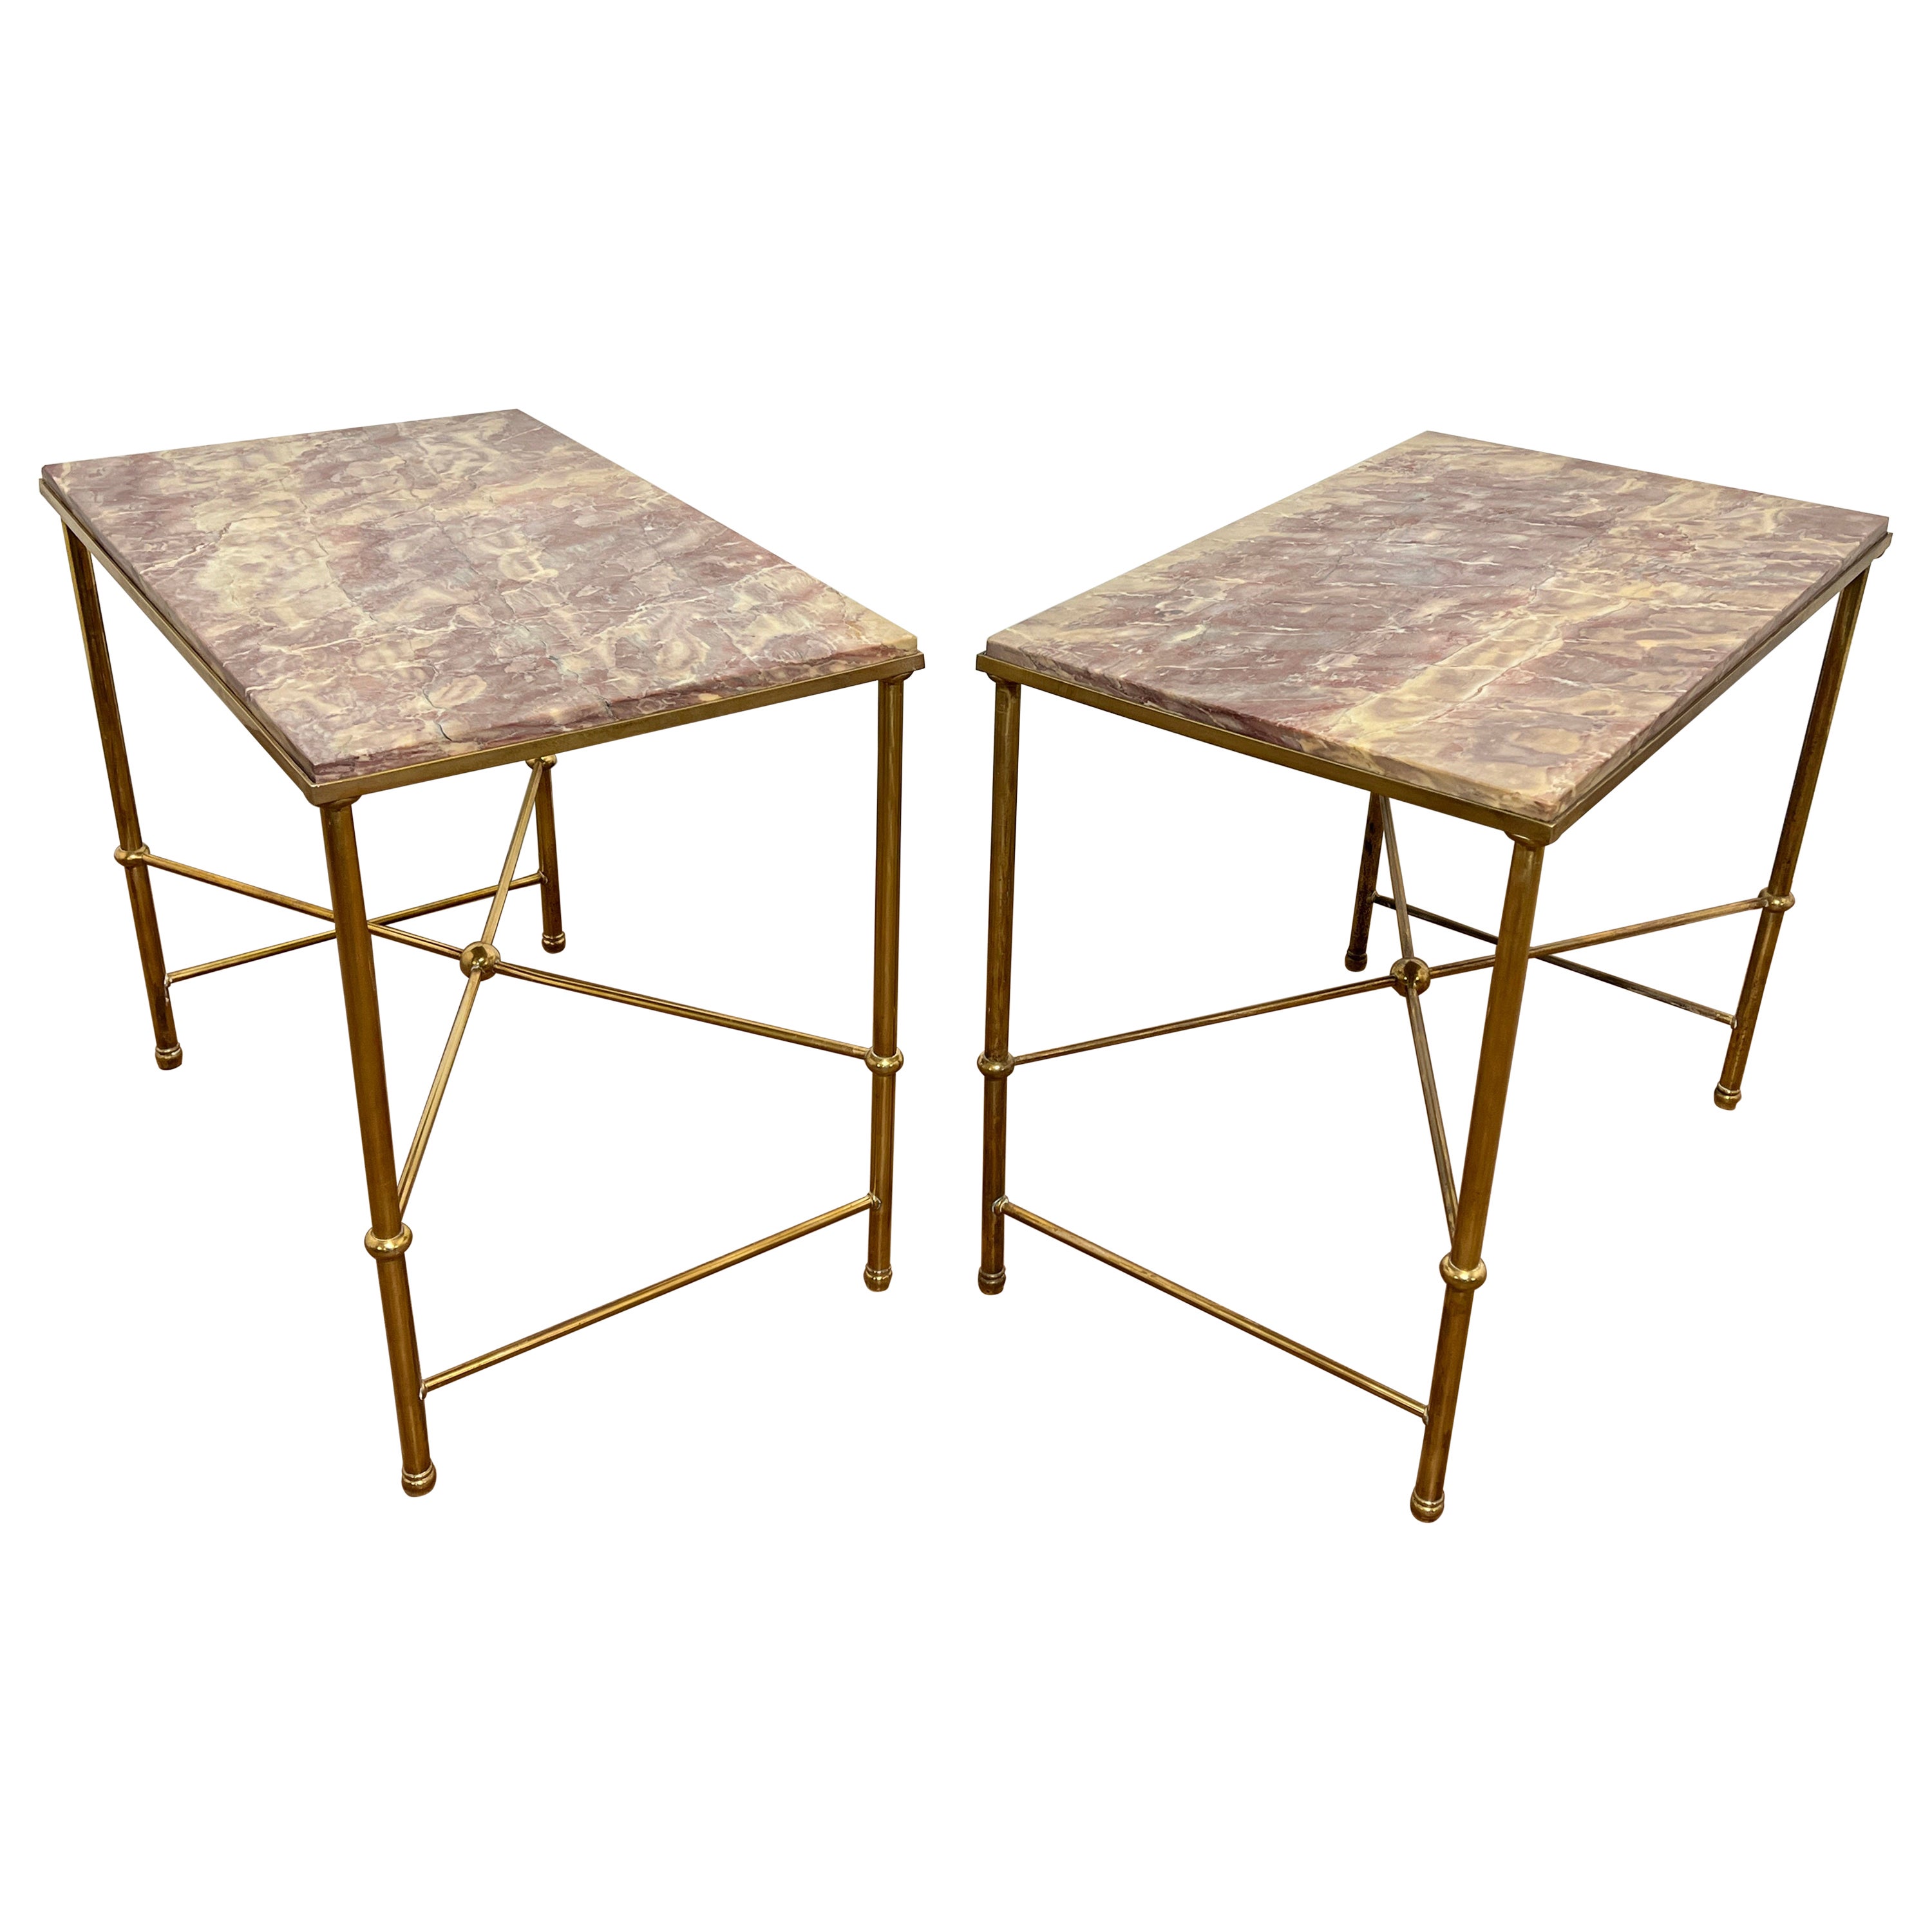 Maison Jansen Solid Brass Side Tables With Lavender Marble Top, C. 1950s